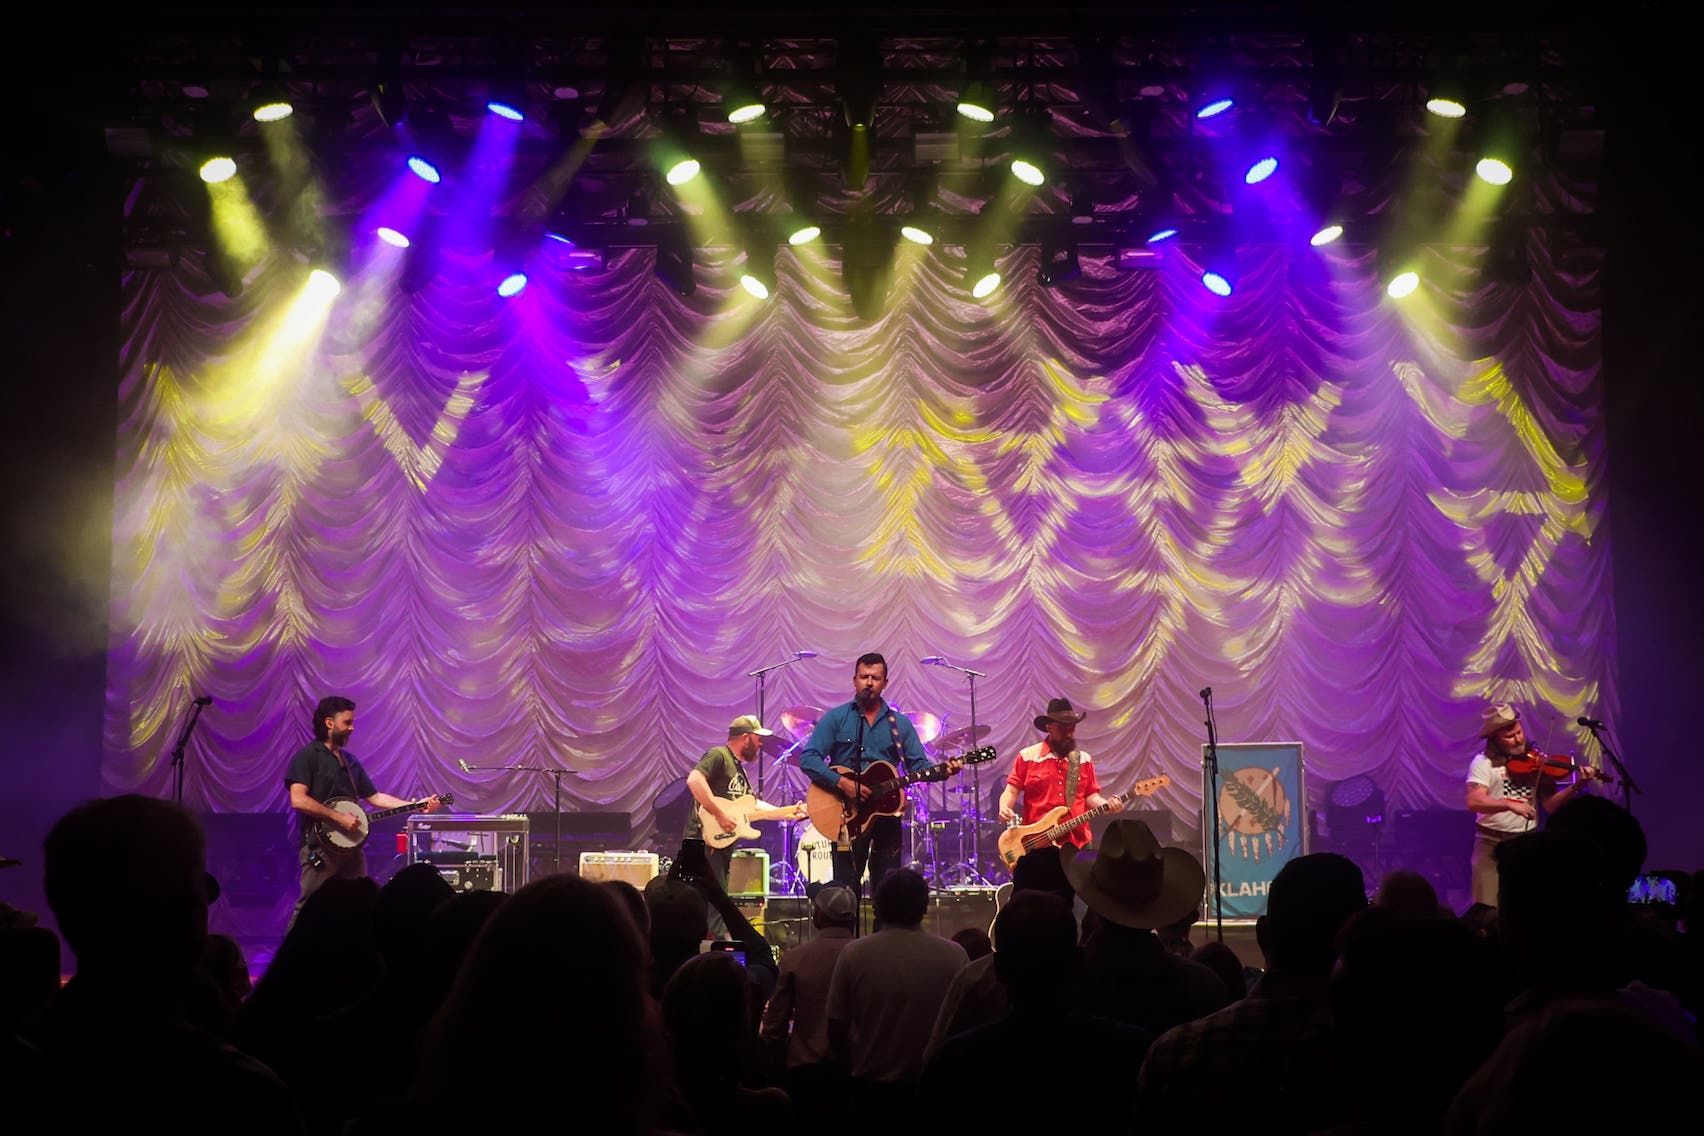 Turnpike Troubadours at The Ryman by Sarah Cahill